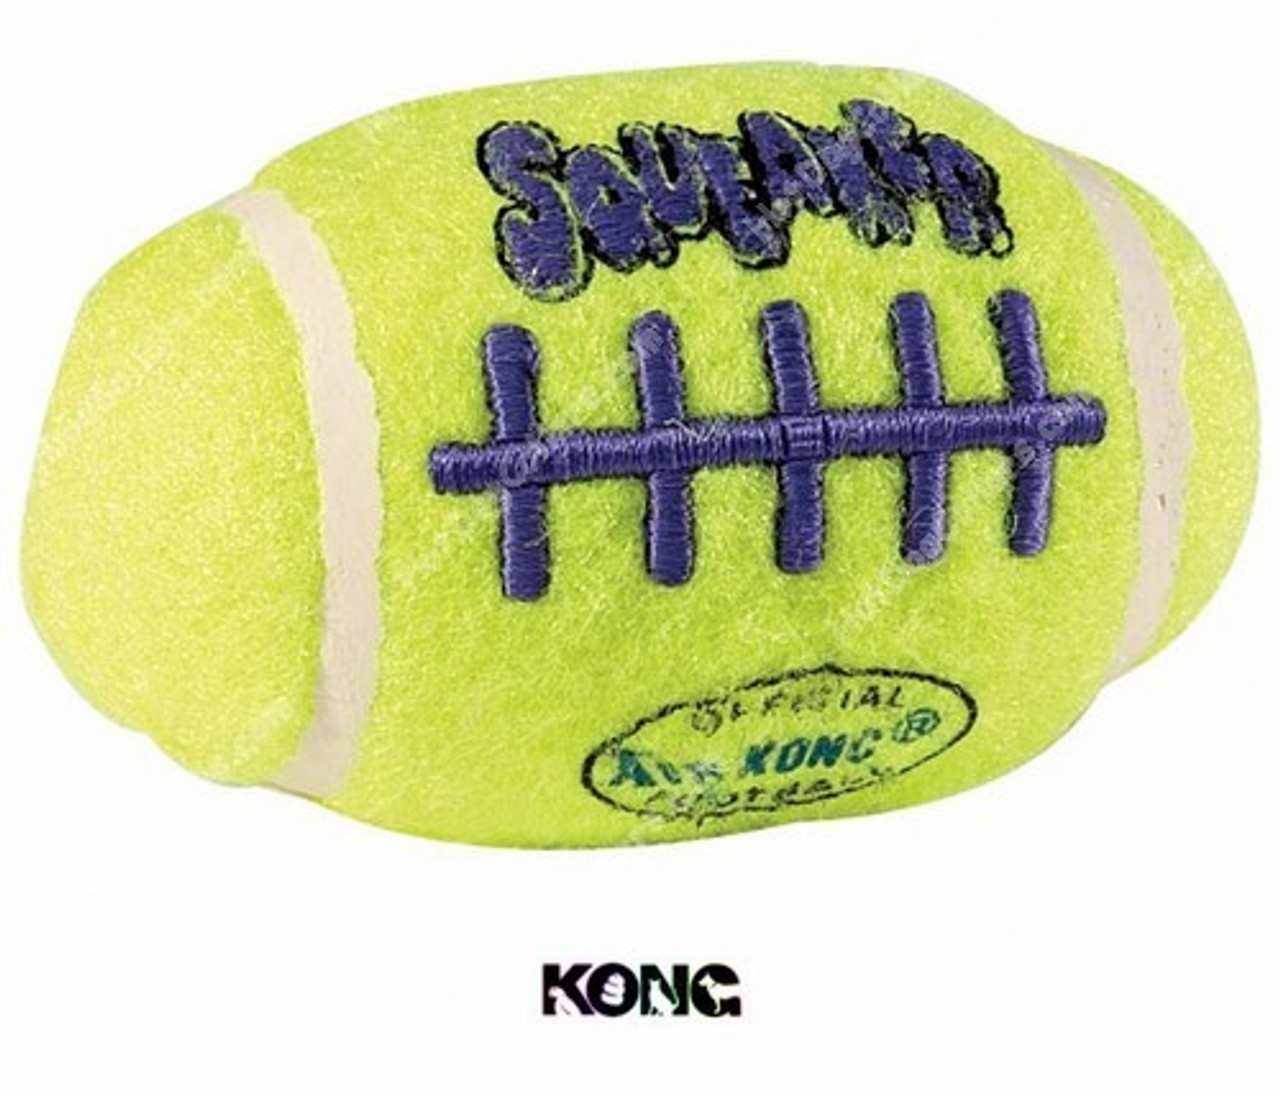  Large Soccer Ball - Soft, Squeaky Dog Toy - Natural